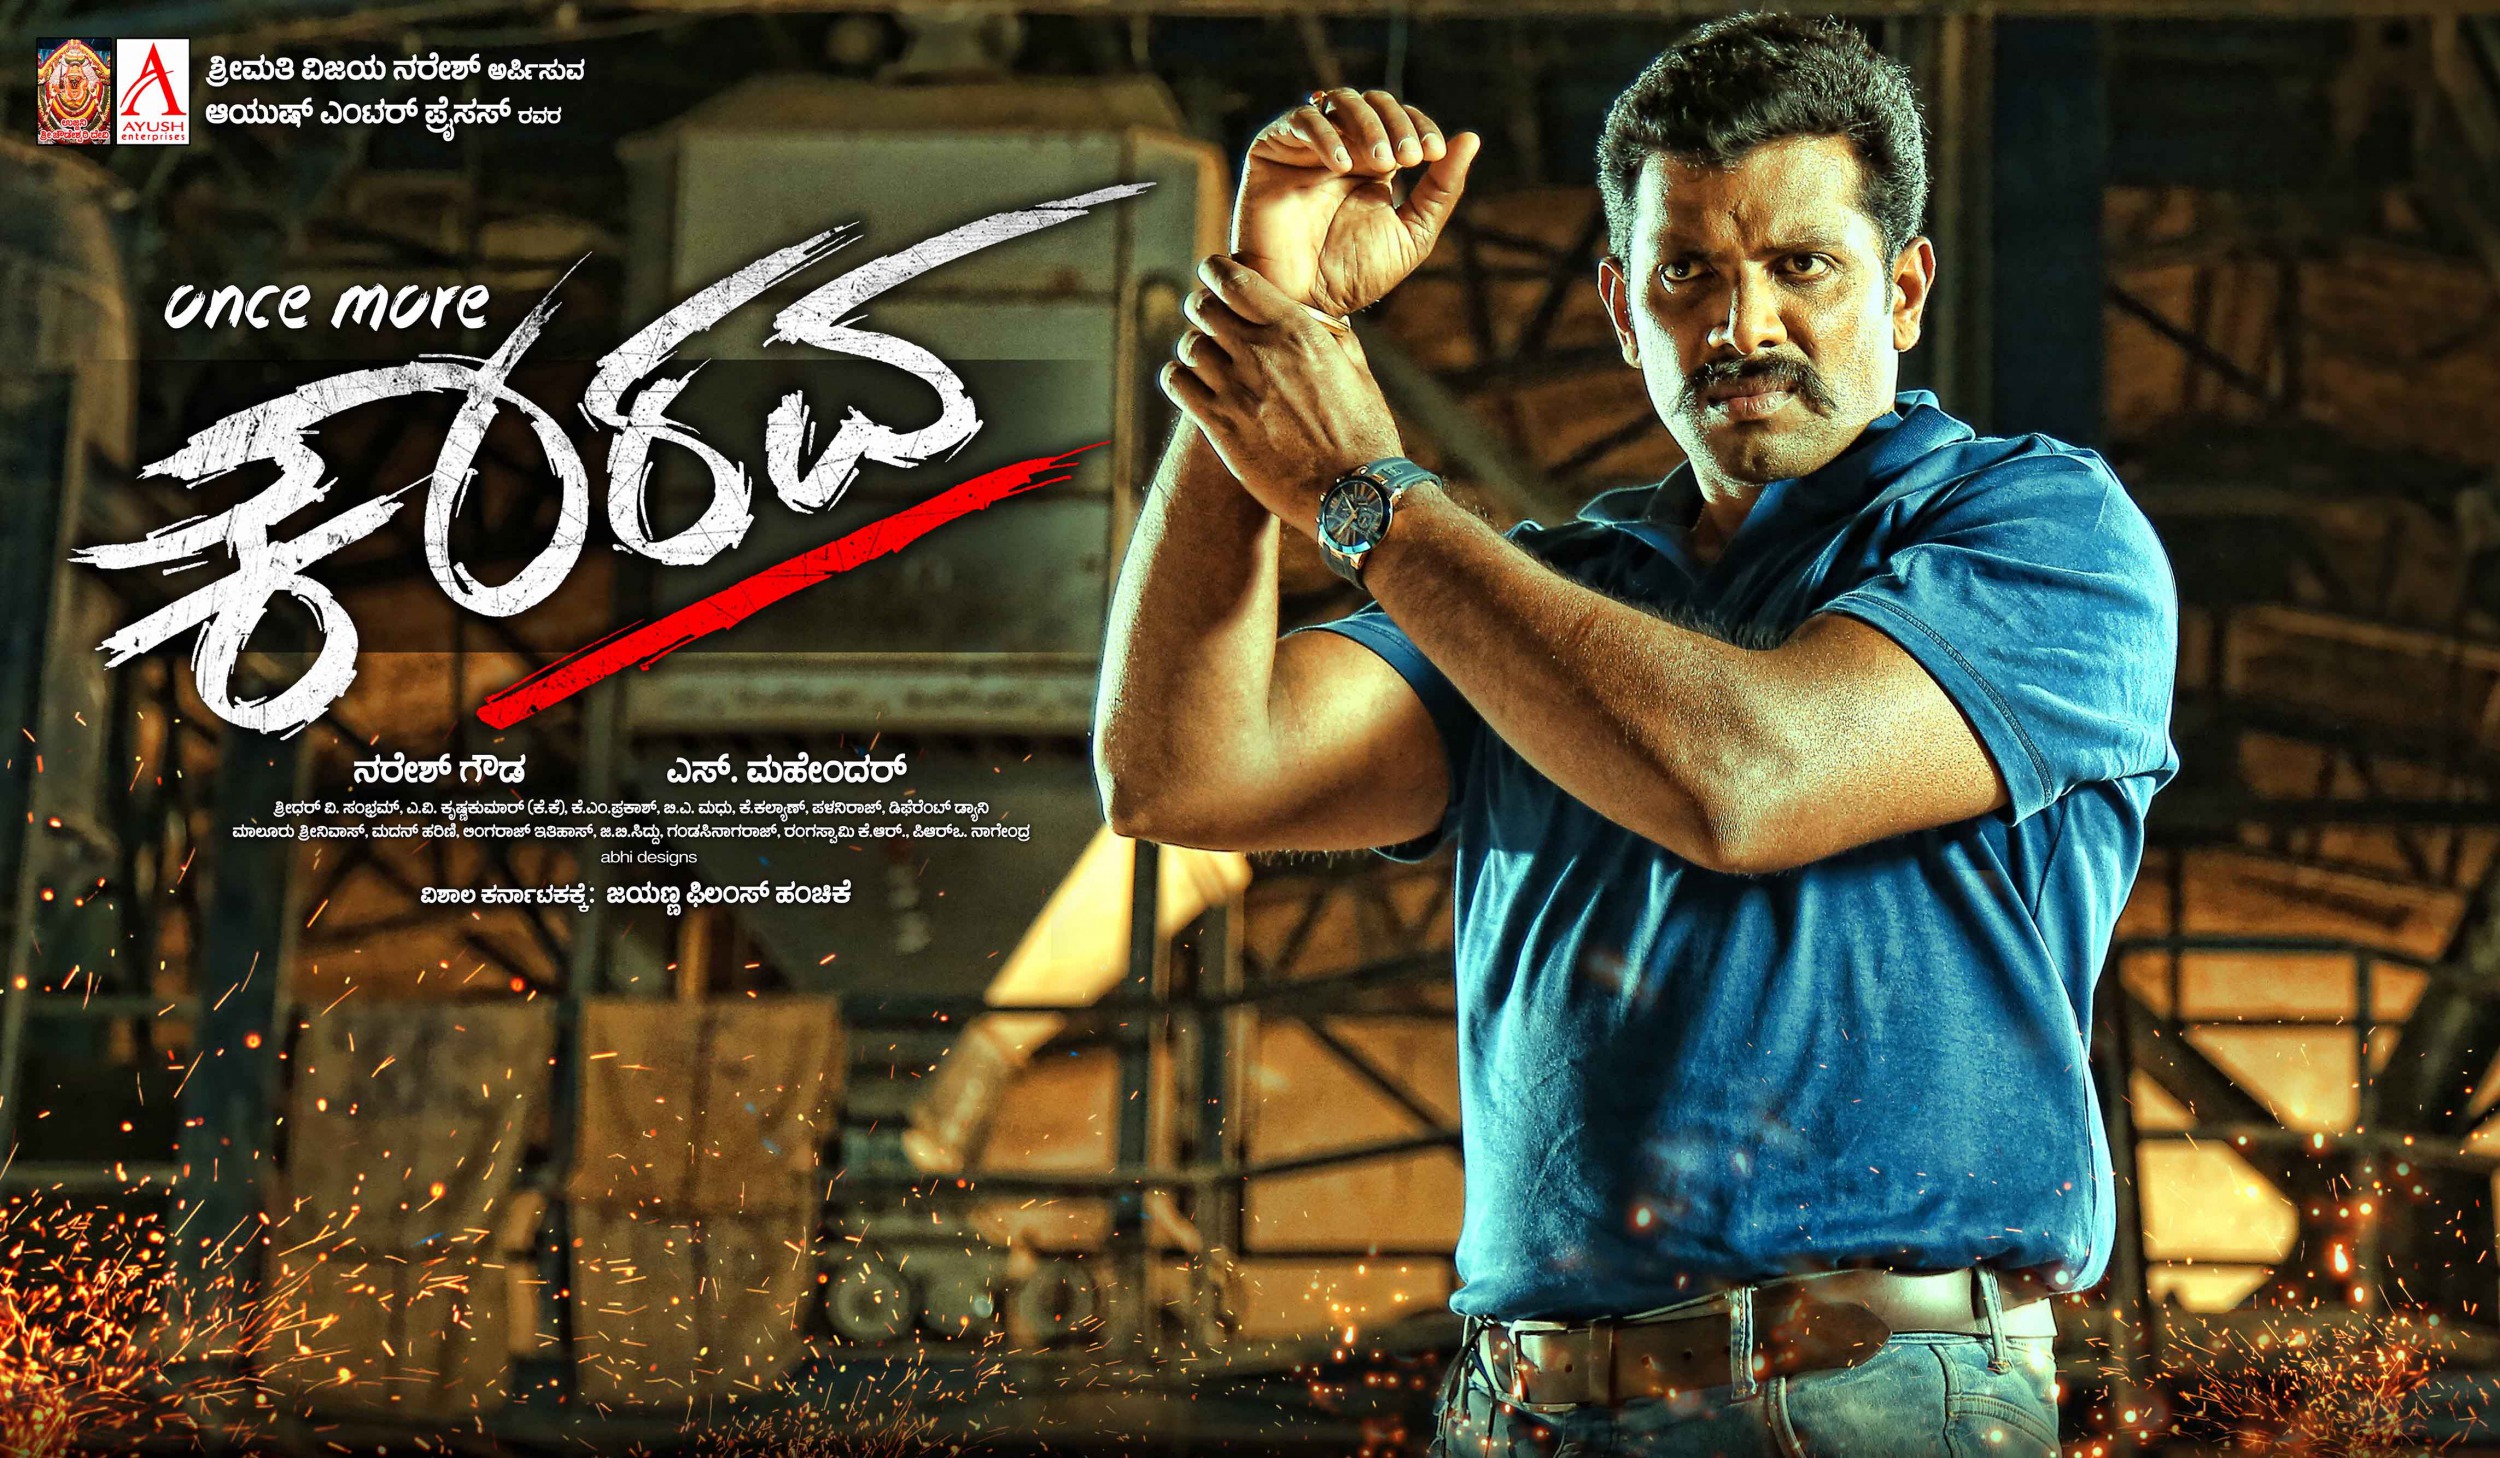 Mega Sized Movie Poster Image for Once More Kaurava (#4 of 20)